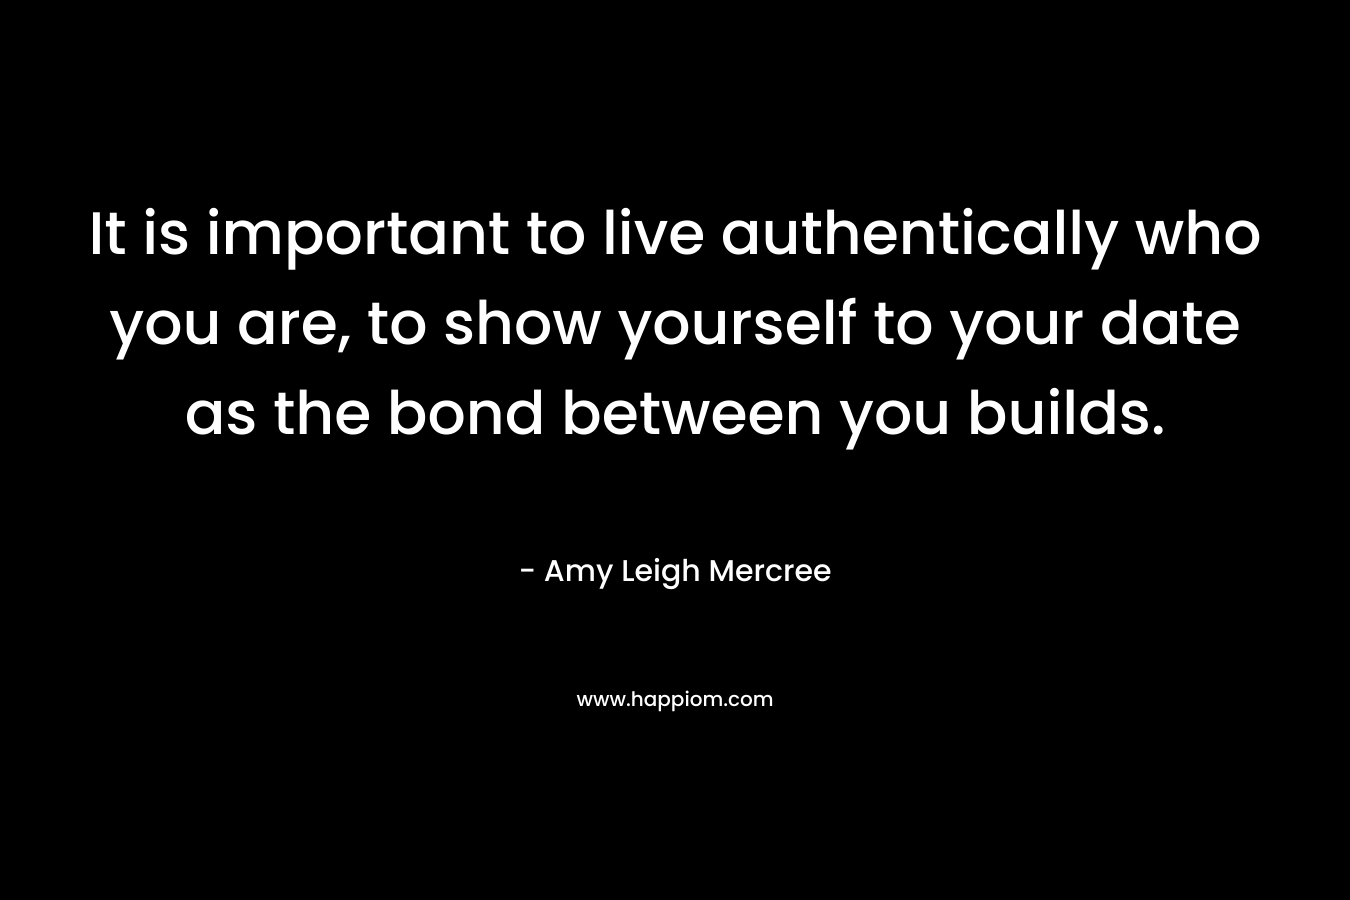 It is important to live authentically who you are, to show yourself to your date as the bond between you builds. – Amy Leigh Mercree